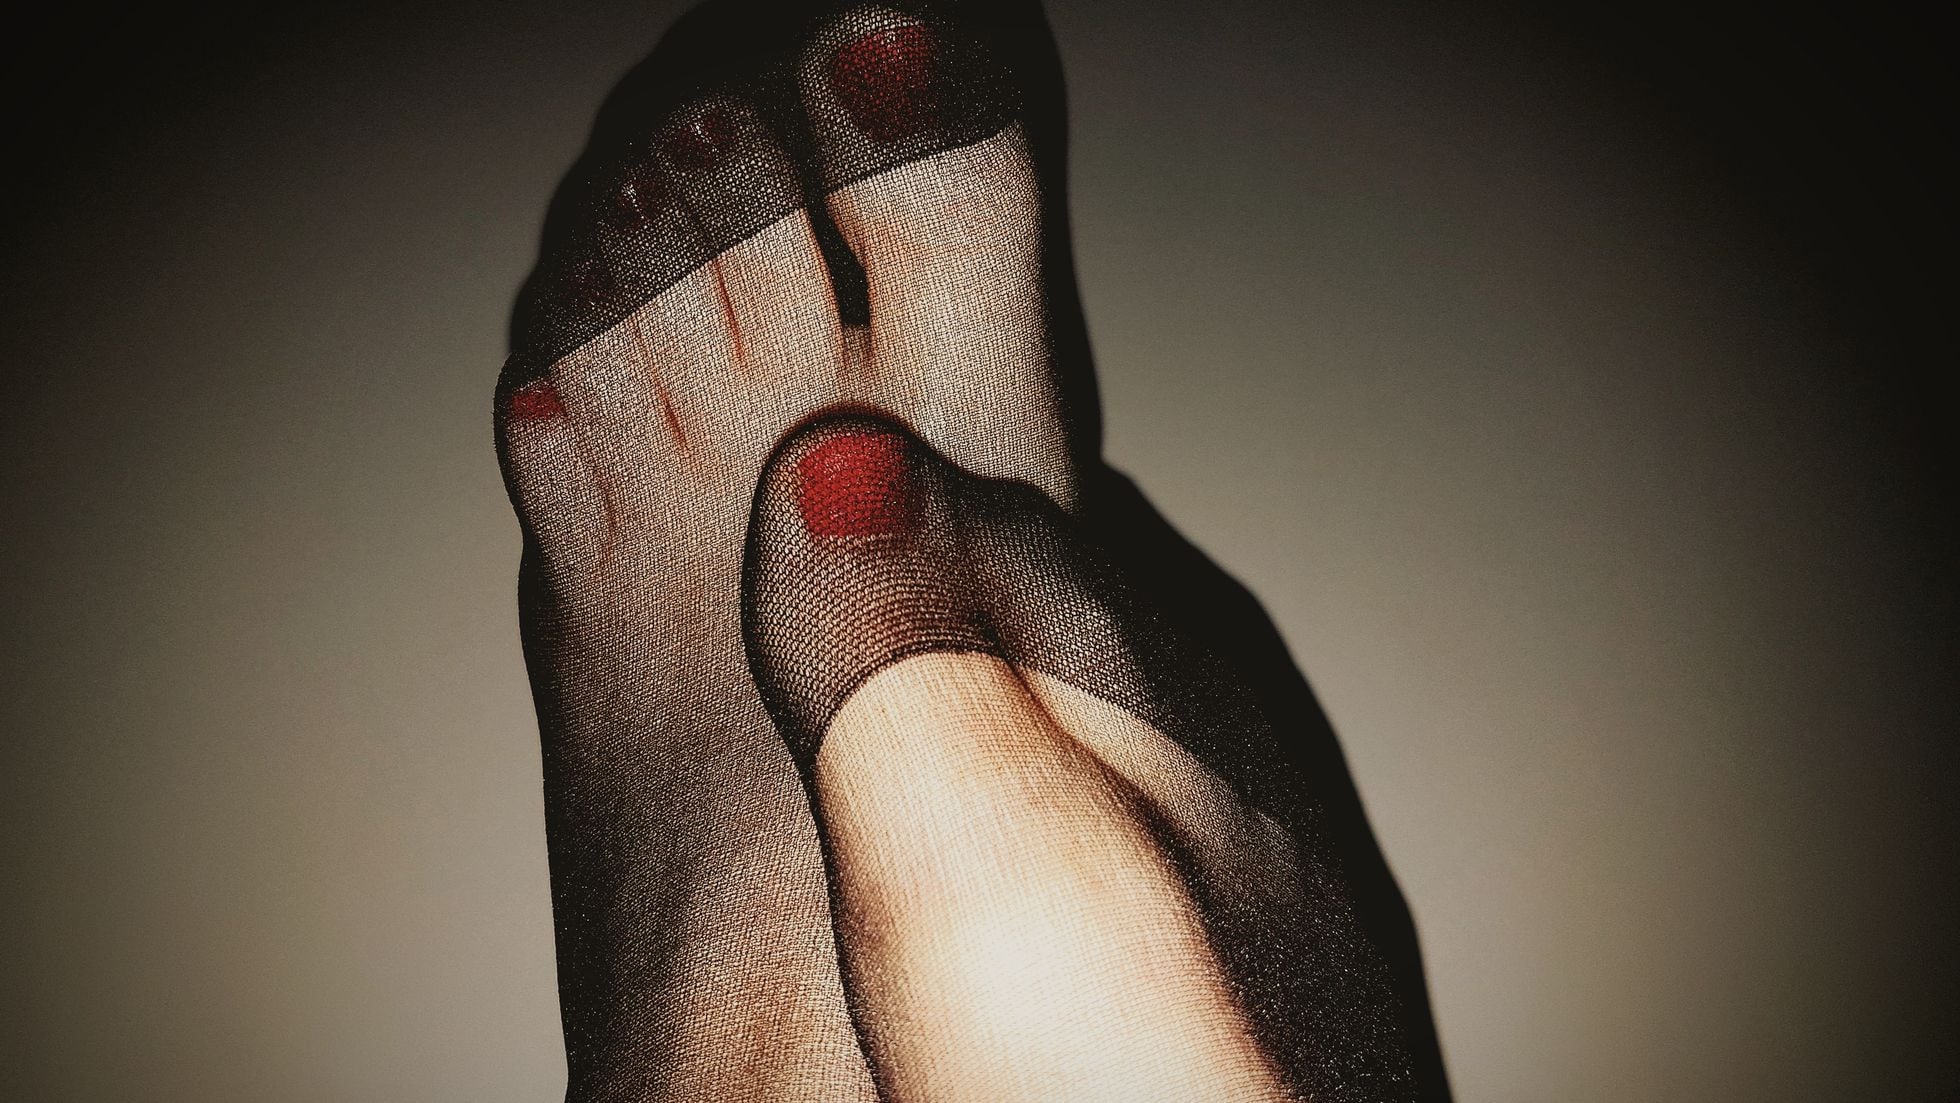 Selling photos of your feet: is it really that simple and profitable?, Society